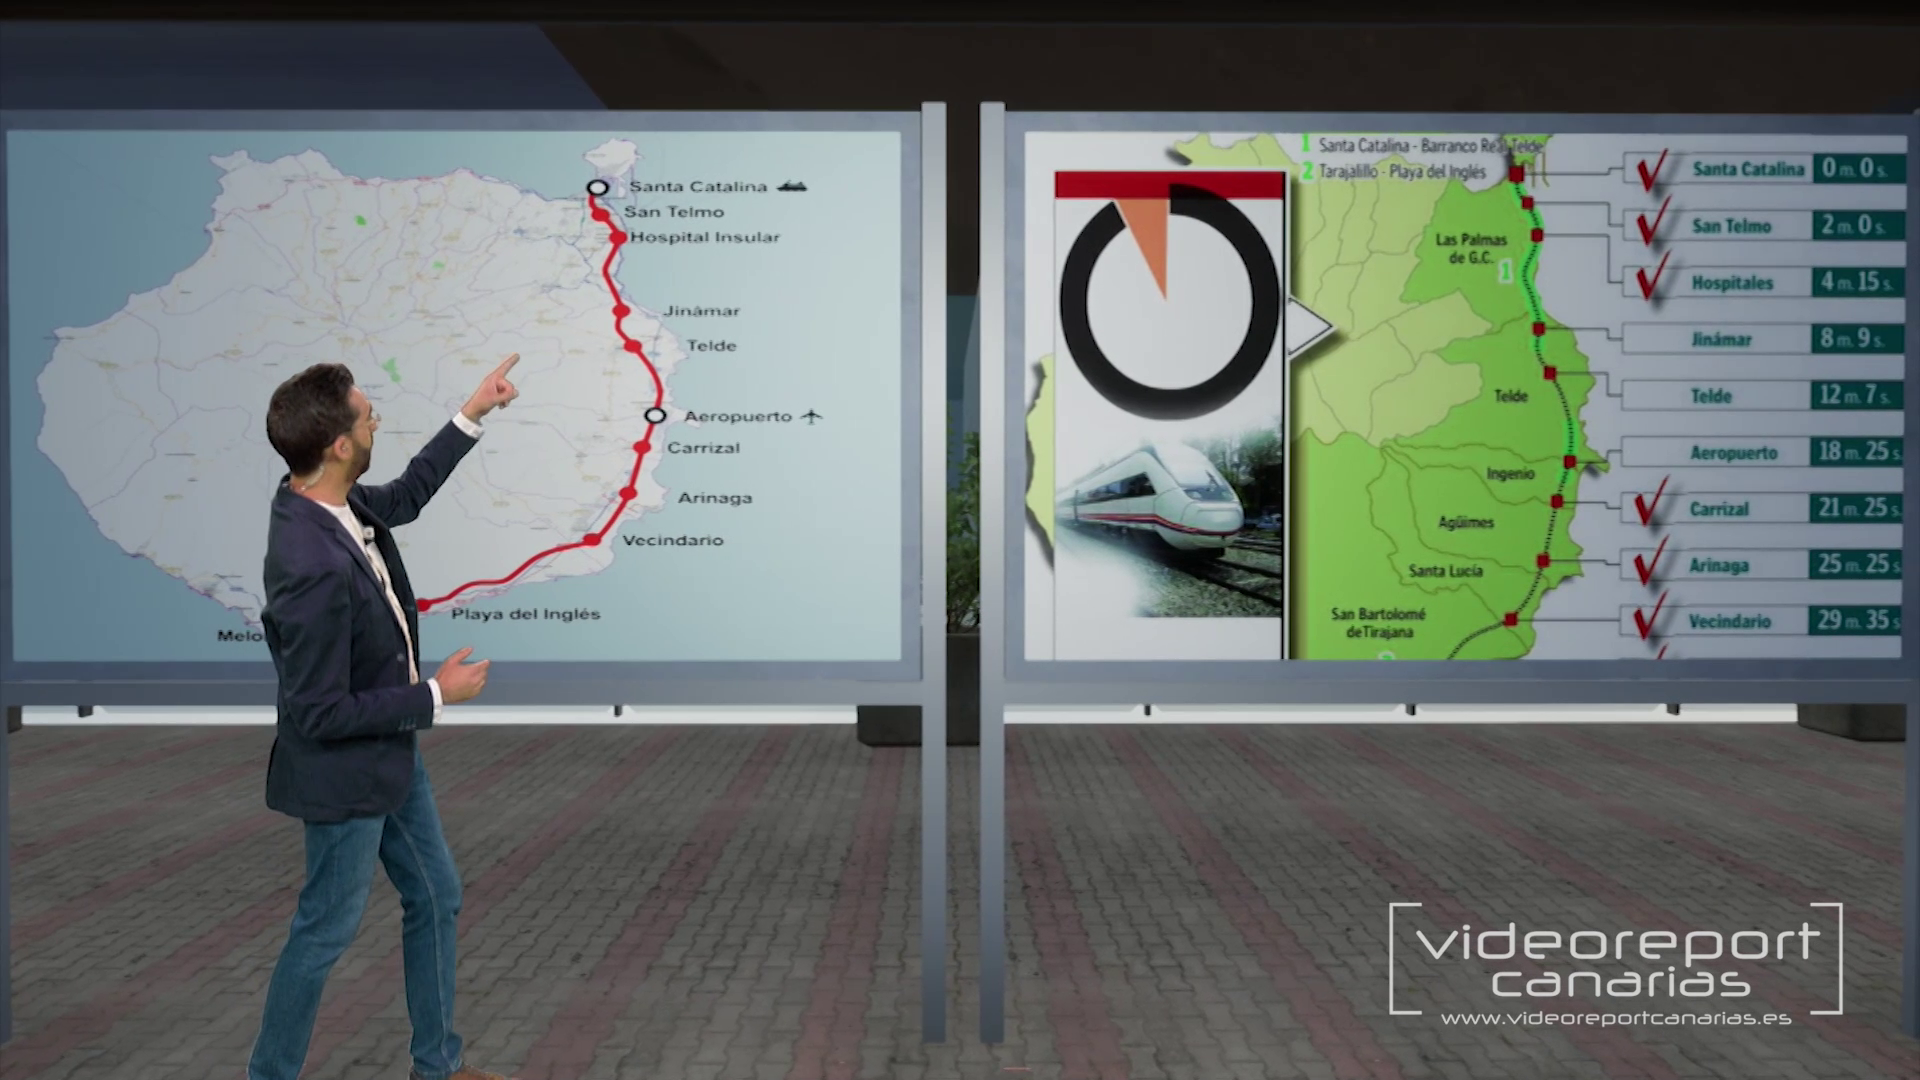 Host of primetime show poiting at virtual map of Canary Islands